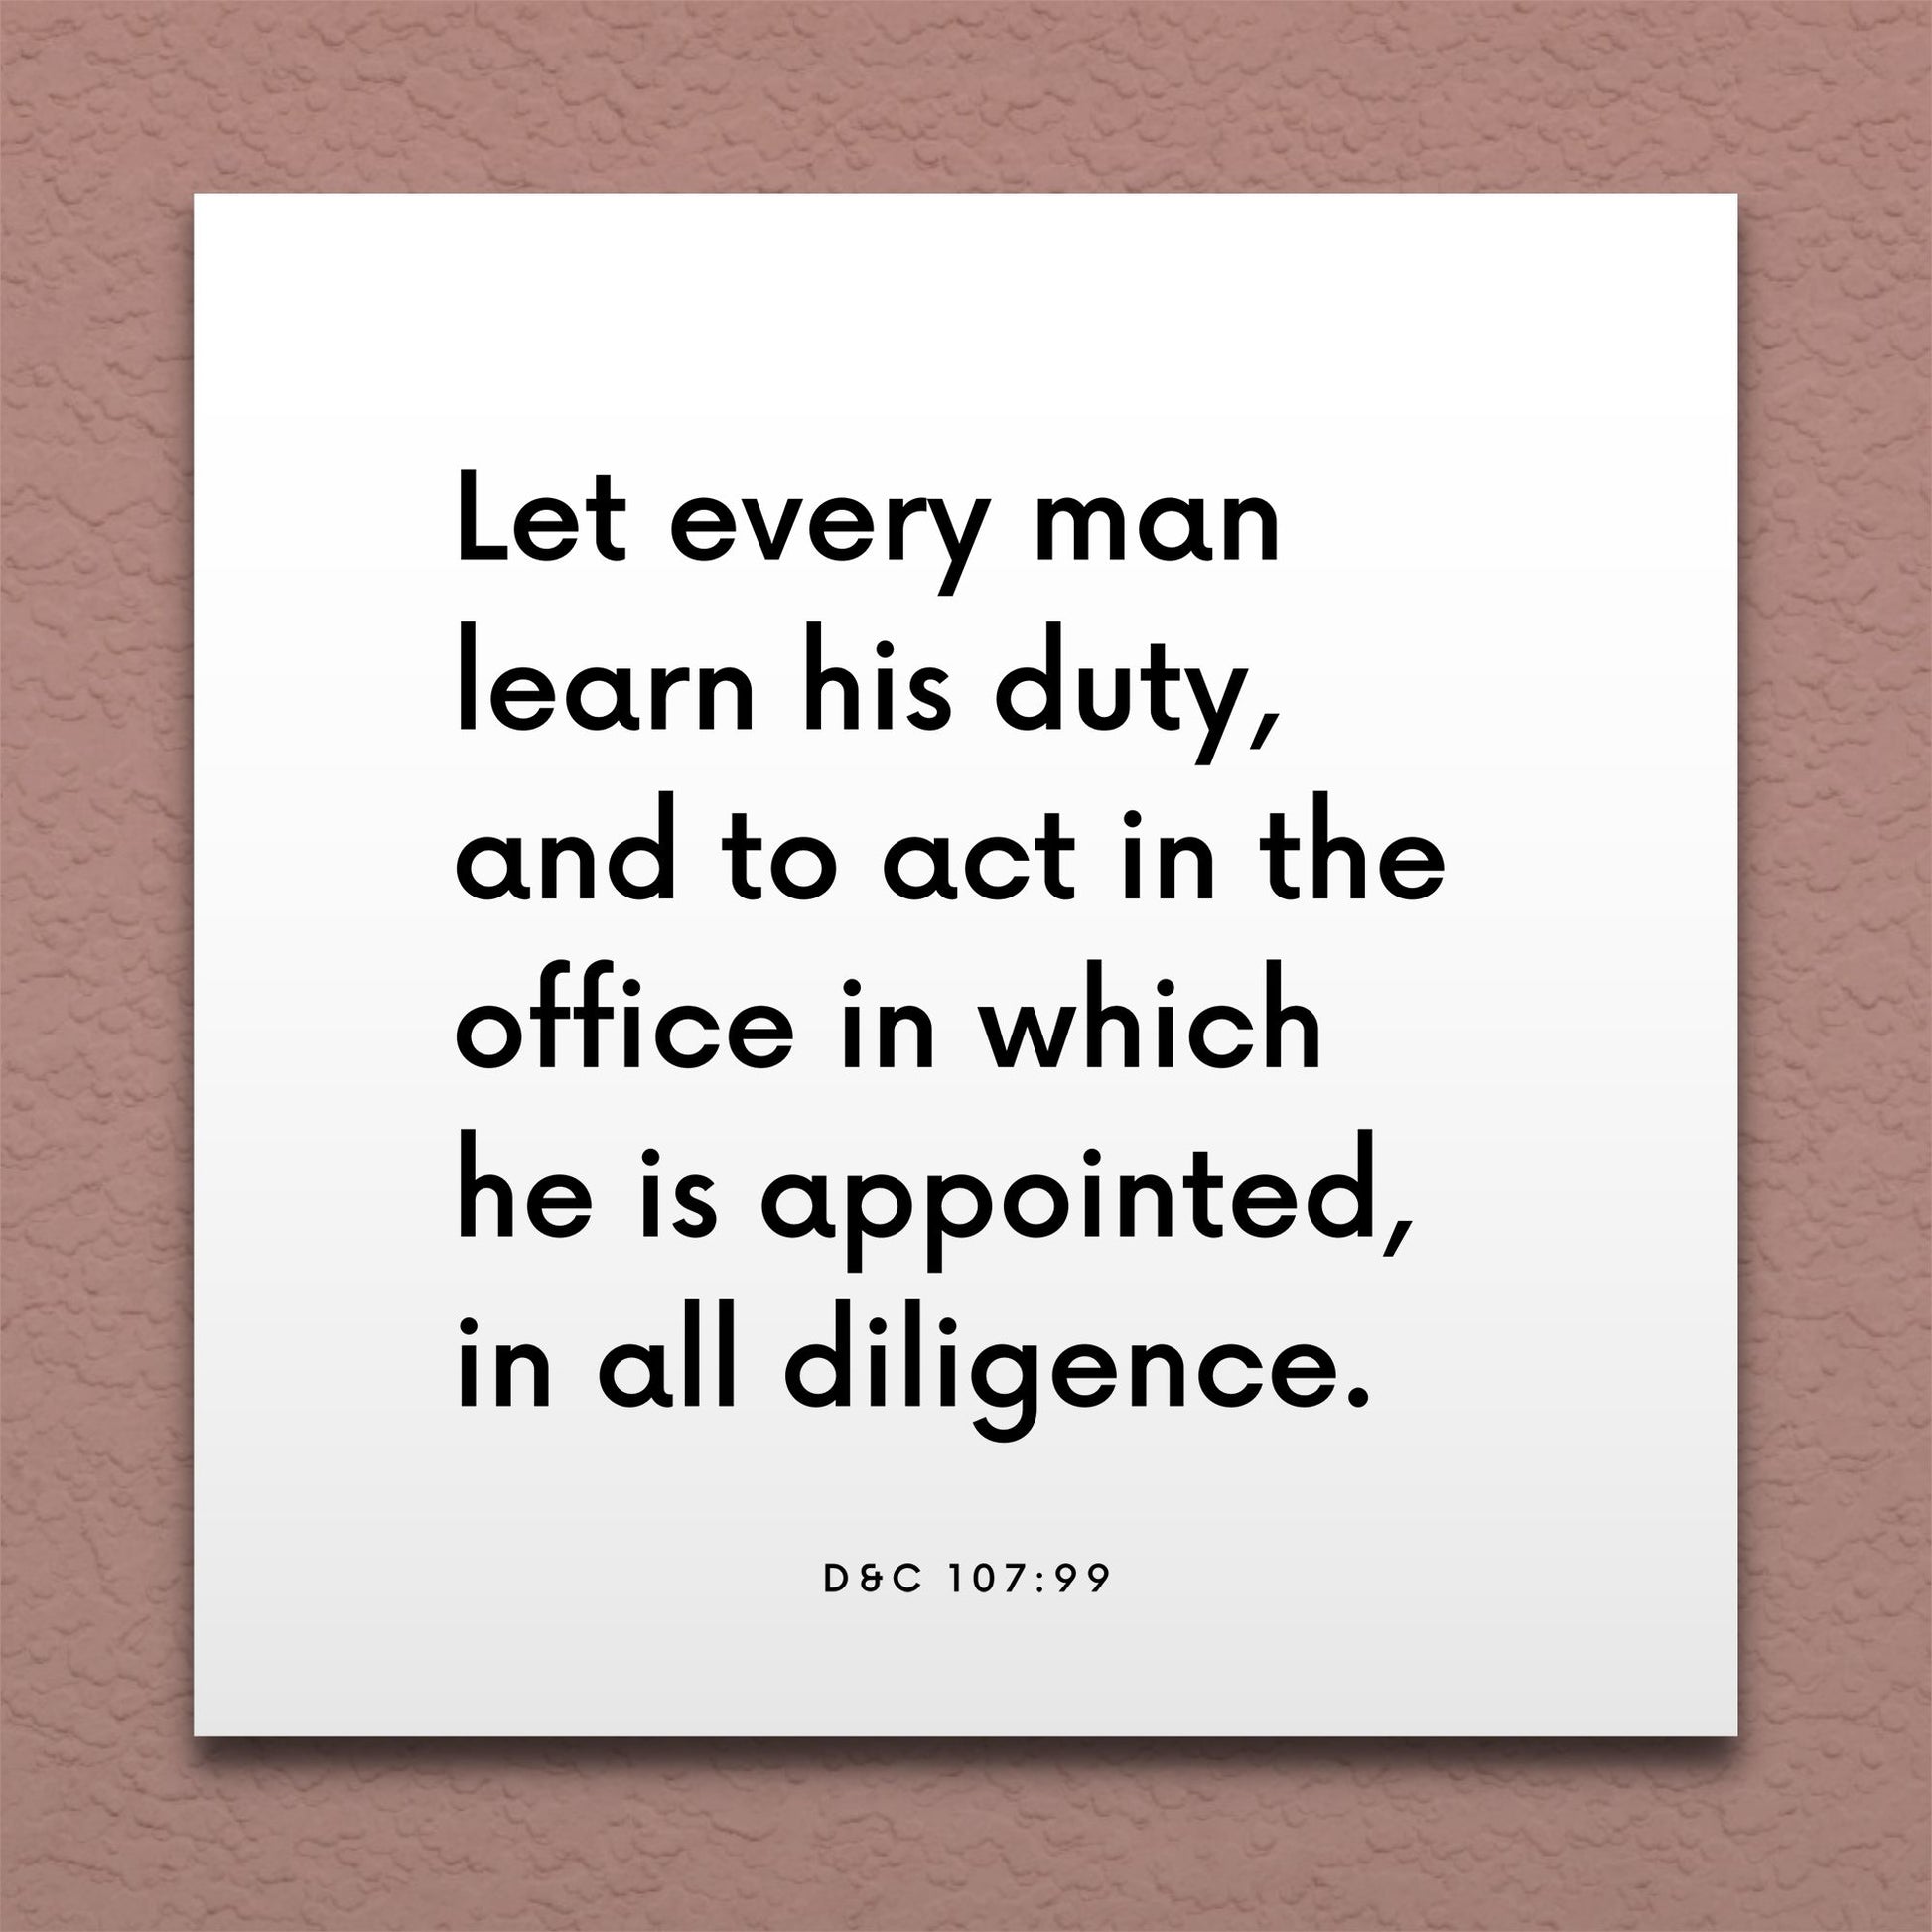 Wall-mounted scripture tile for D&C 107:99 - "Let every man learn his duty"